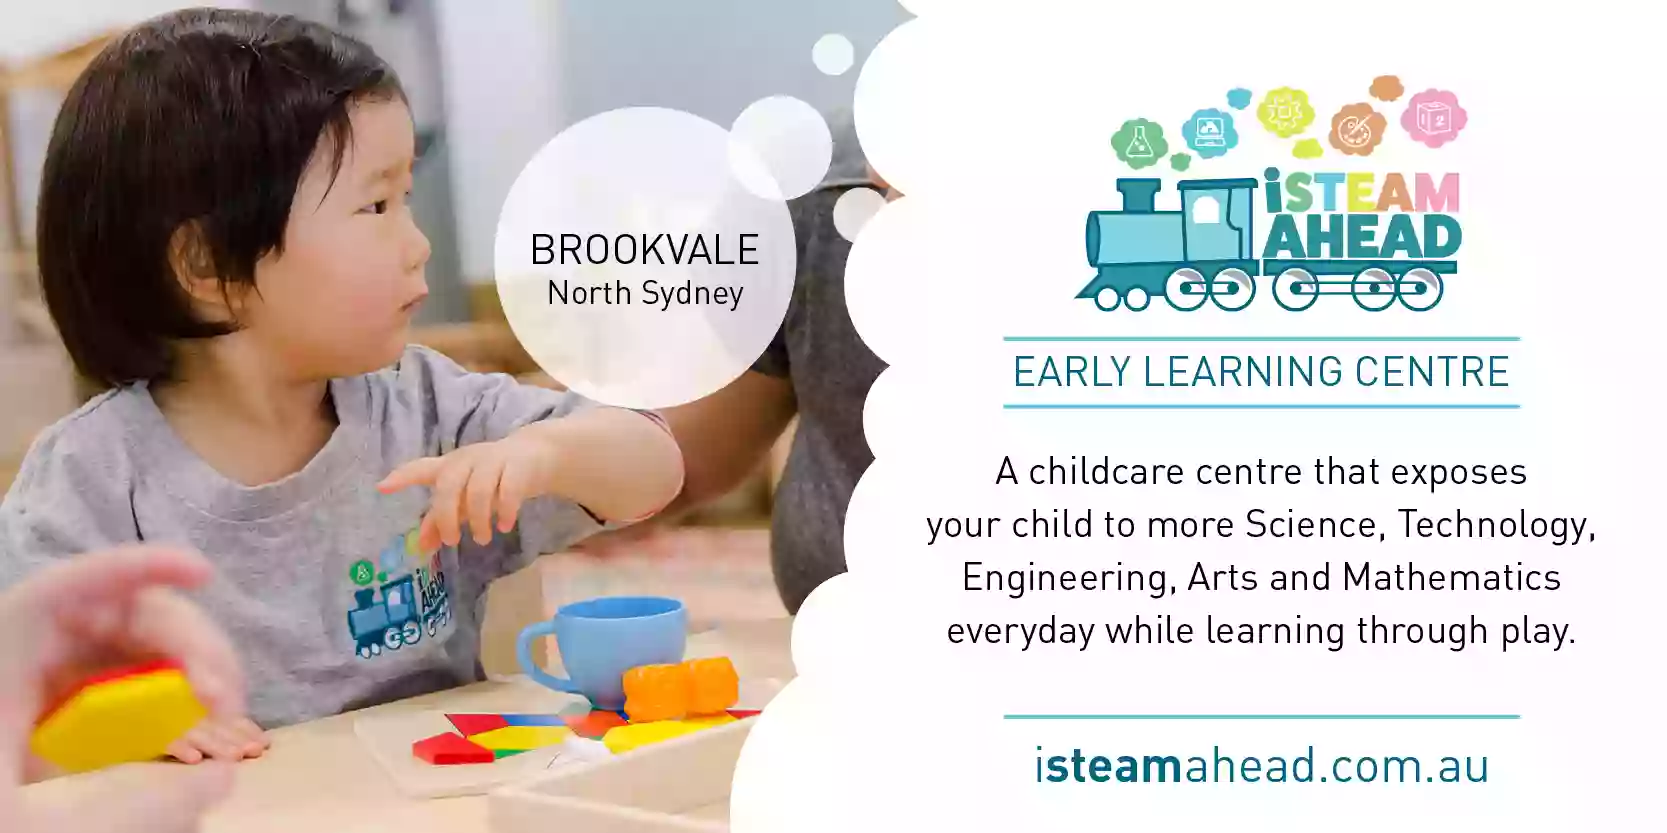 iSteam Ahead Early Learning Centre